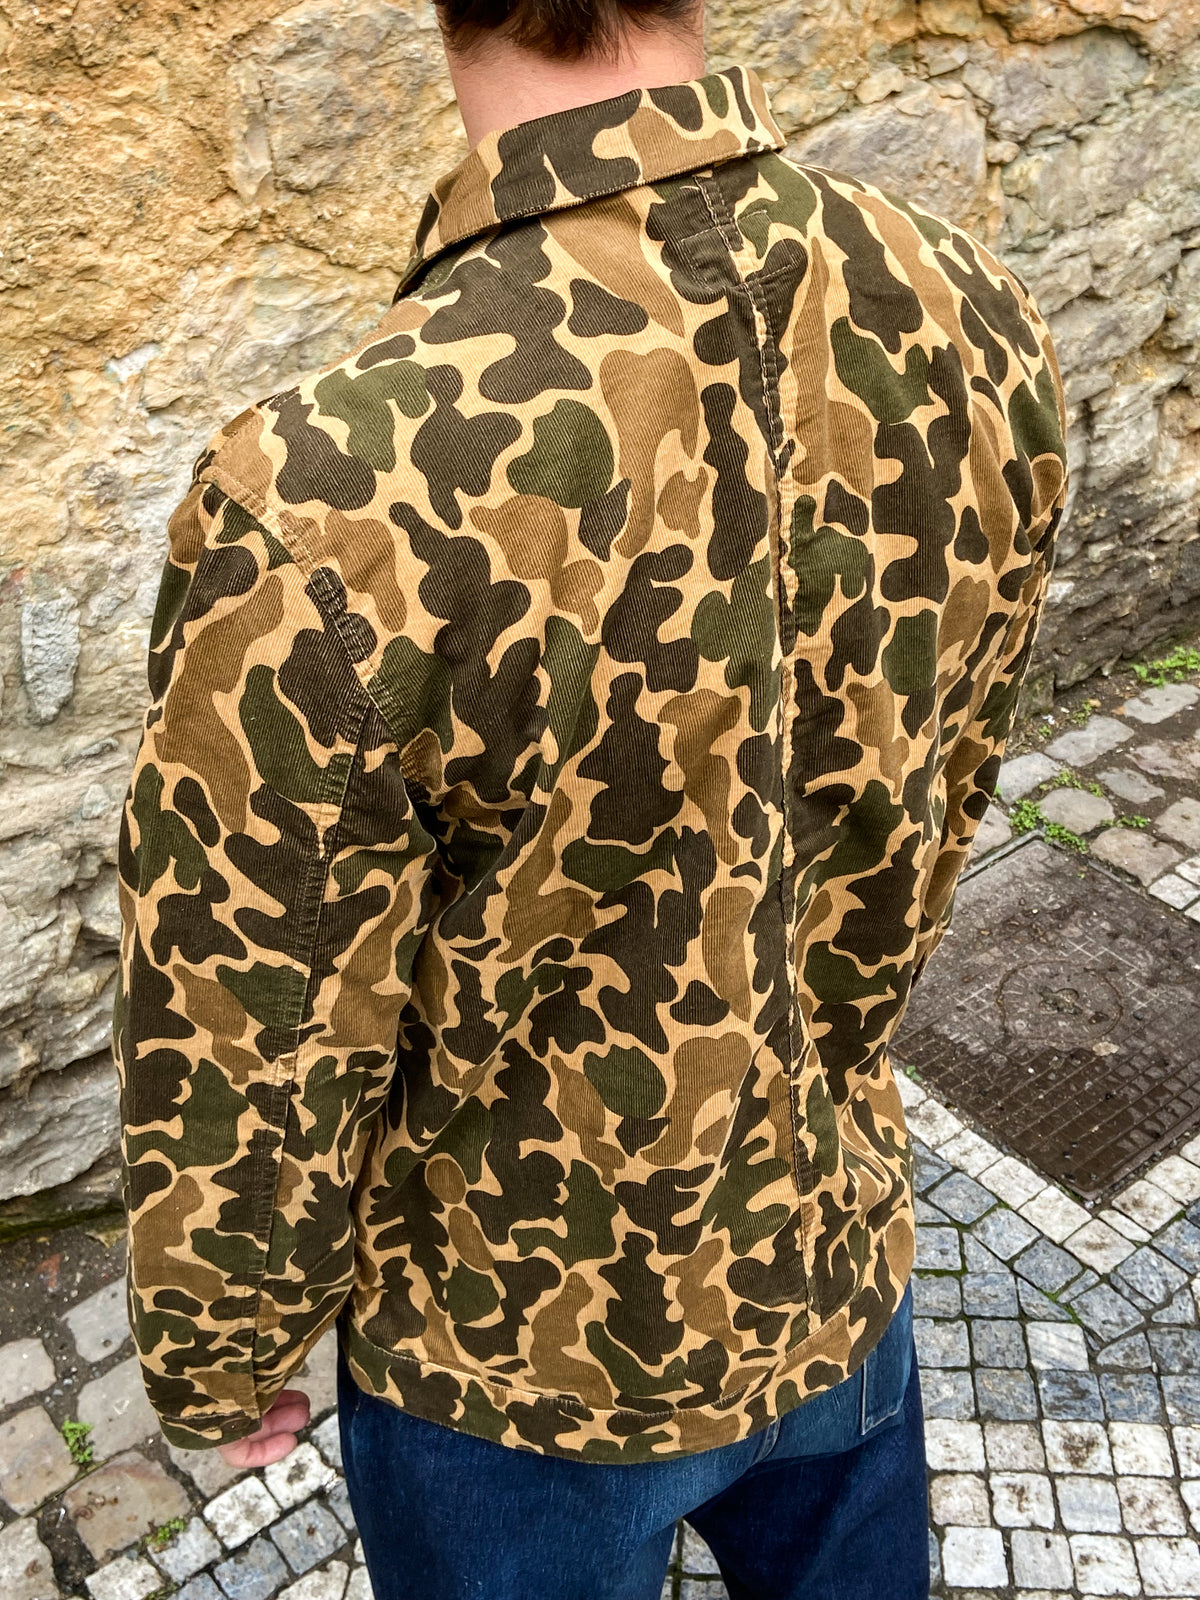 Nudie Jeans Colin Camouflage Multi